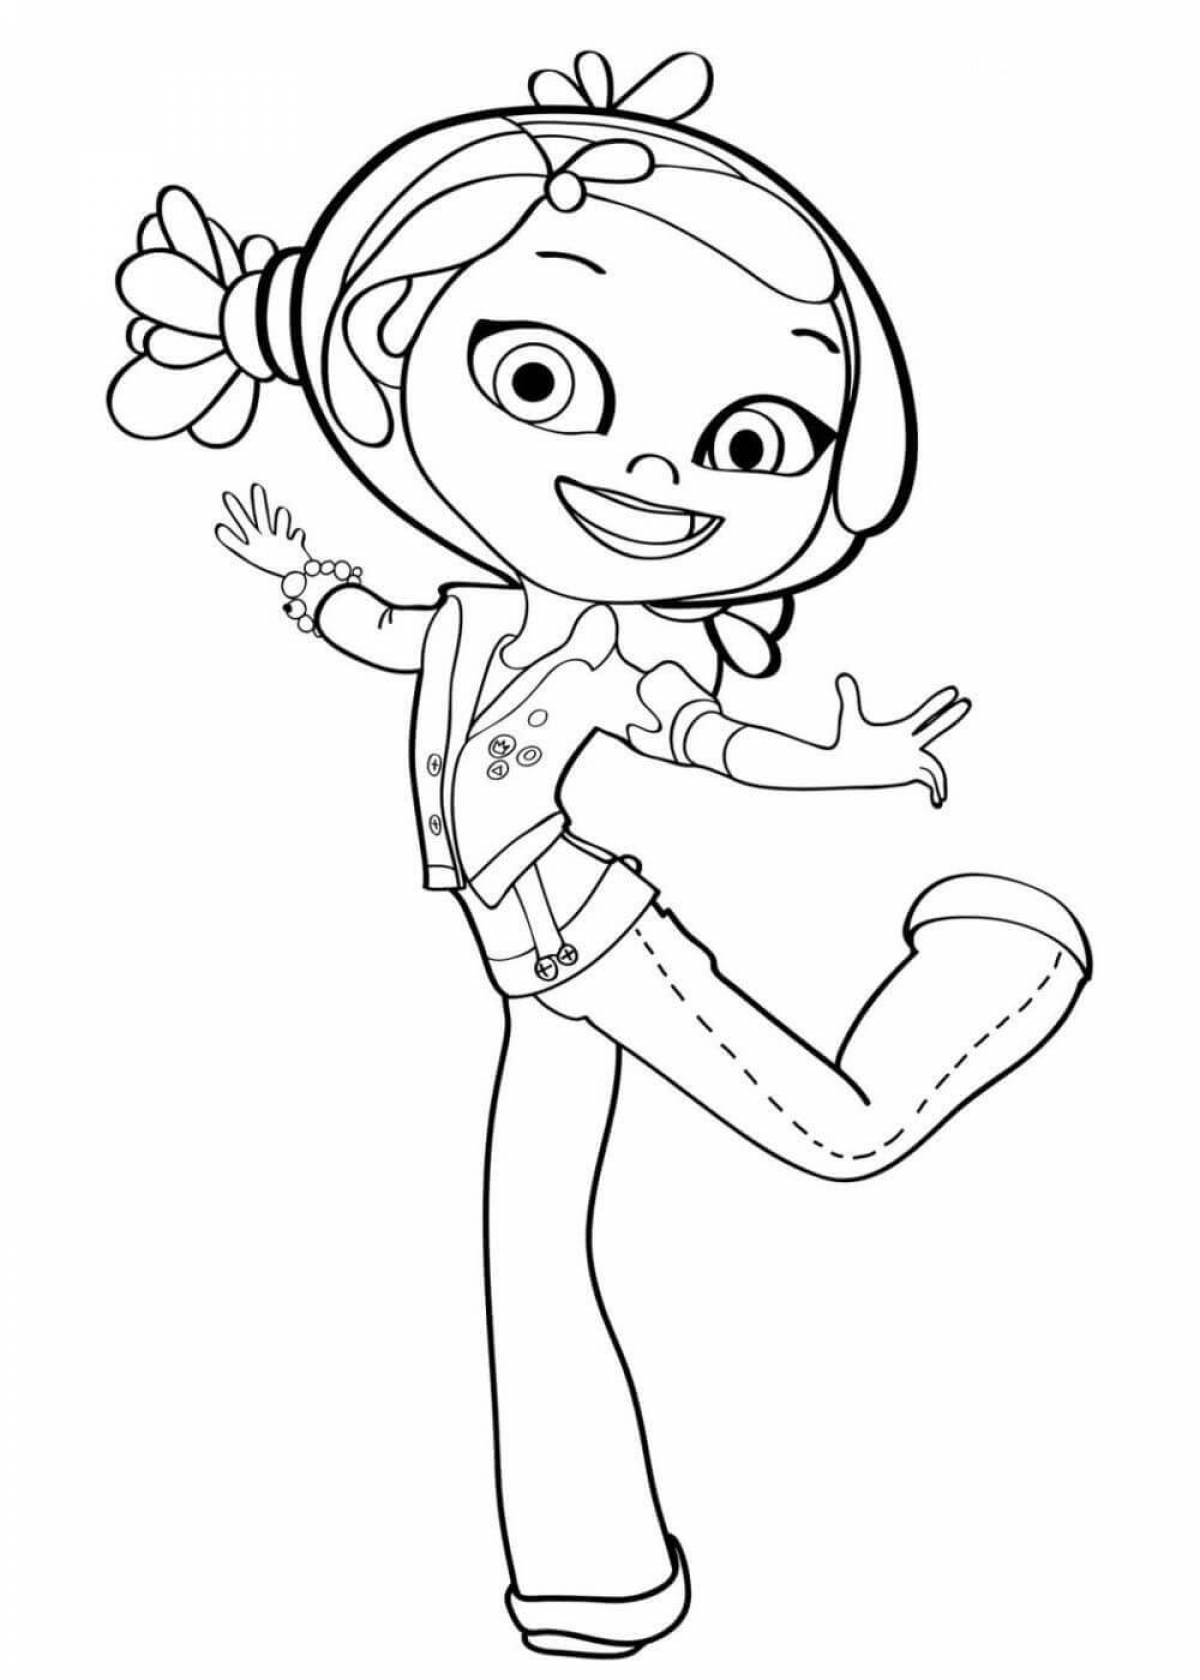 Amazing snowball patrol coloring page